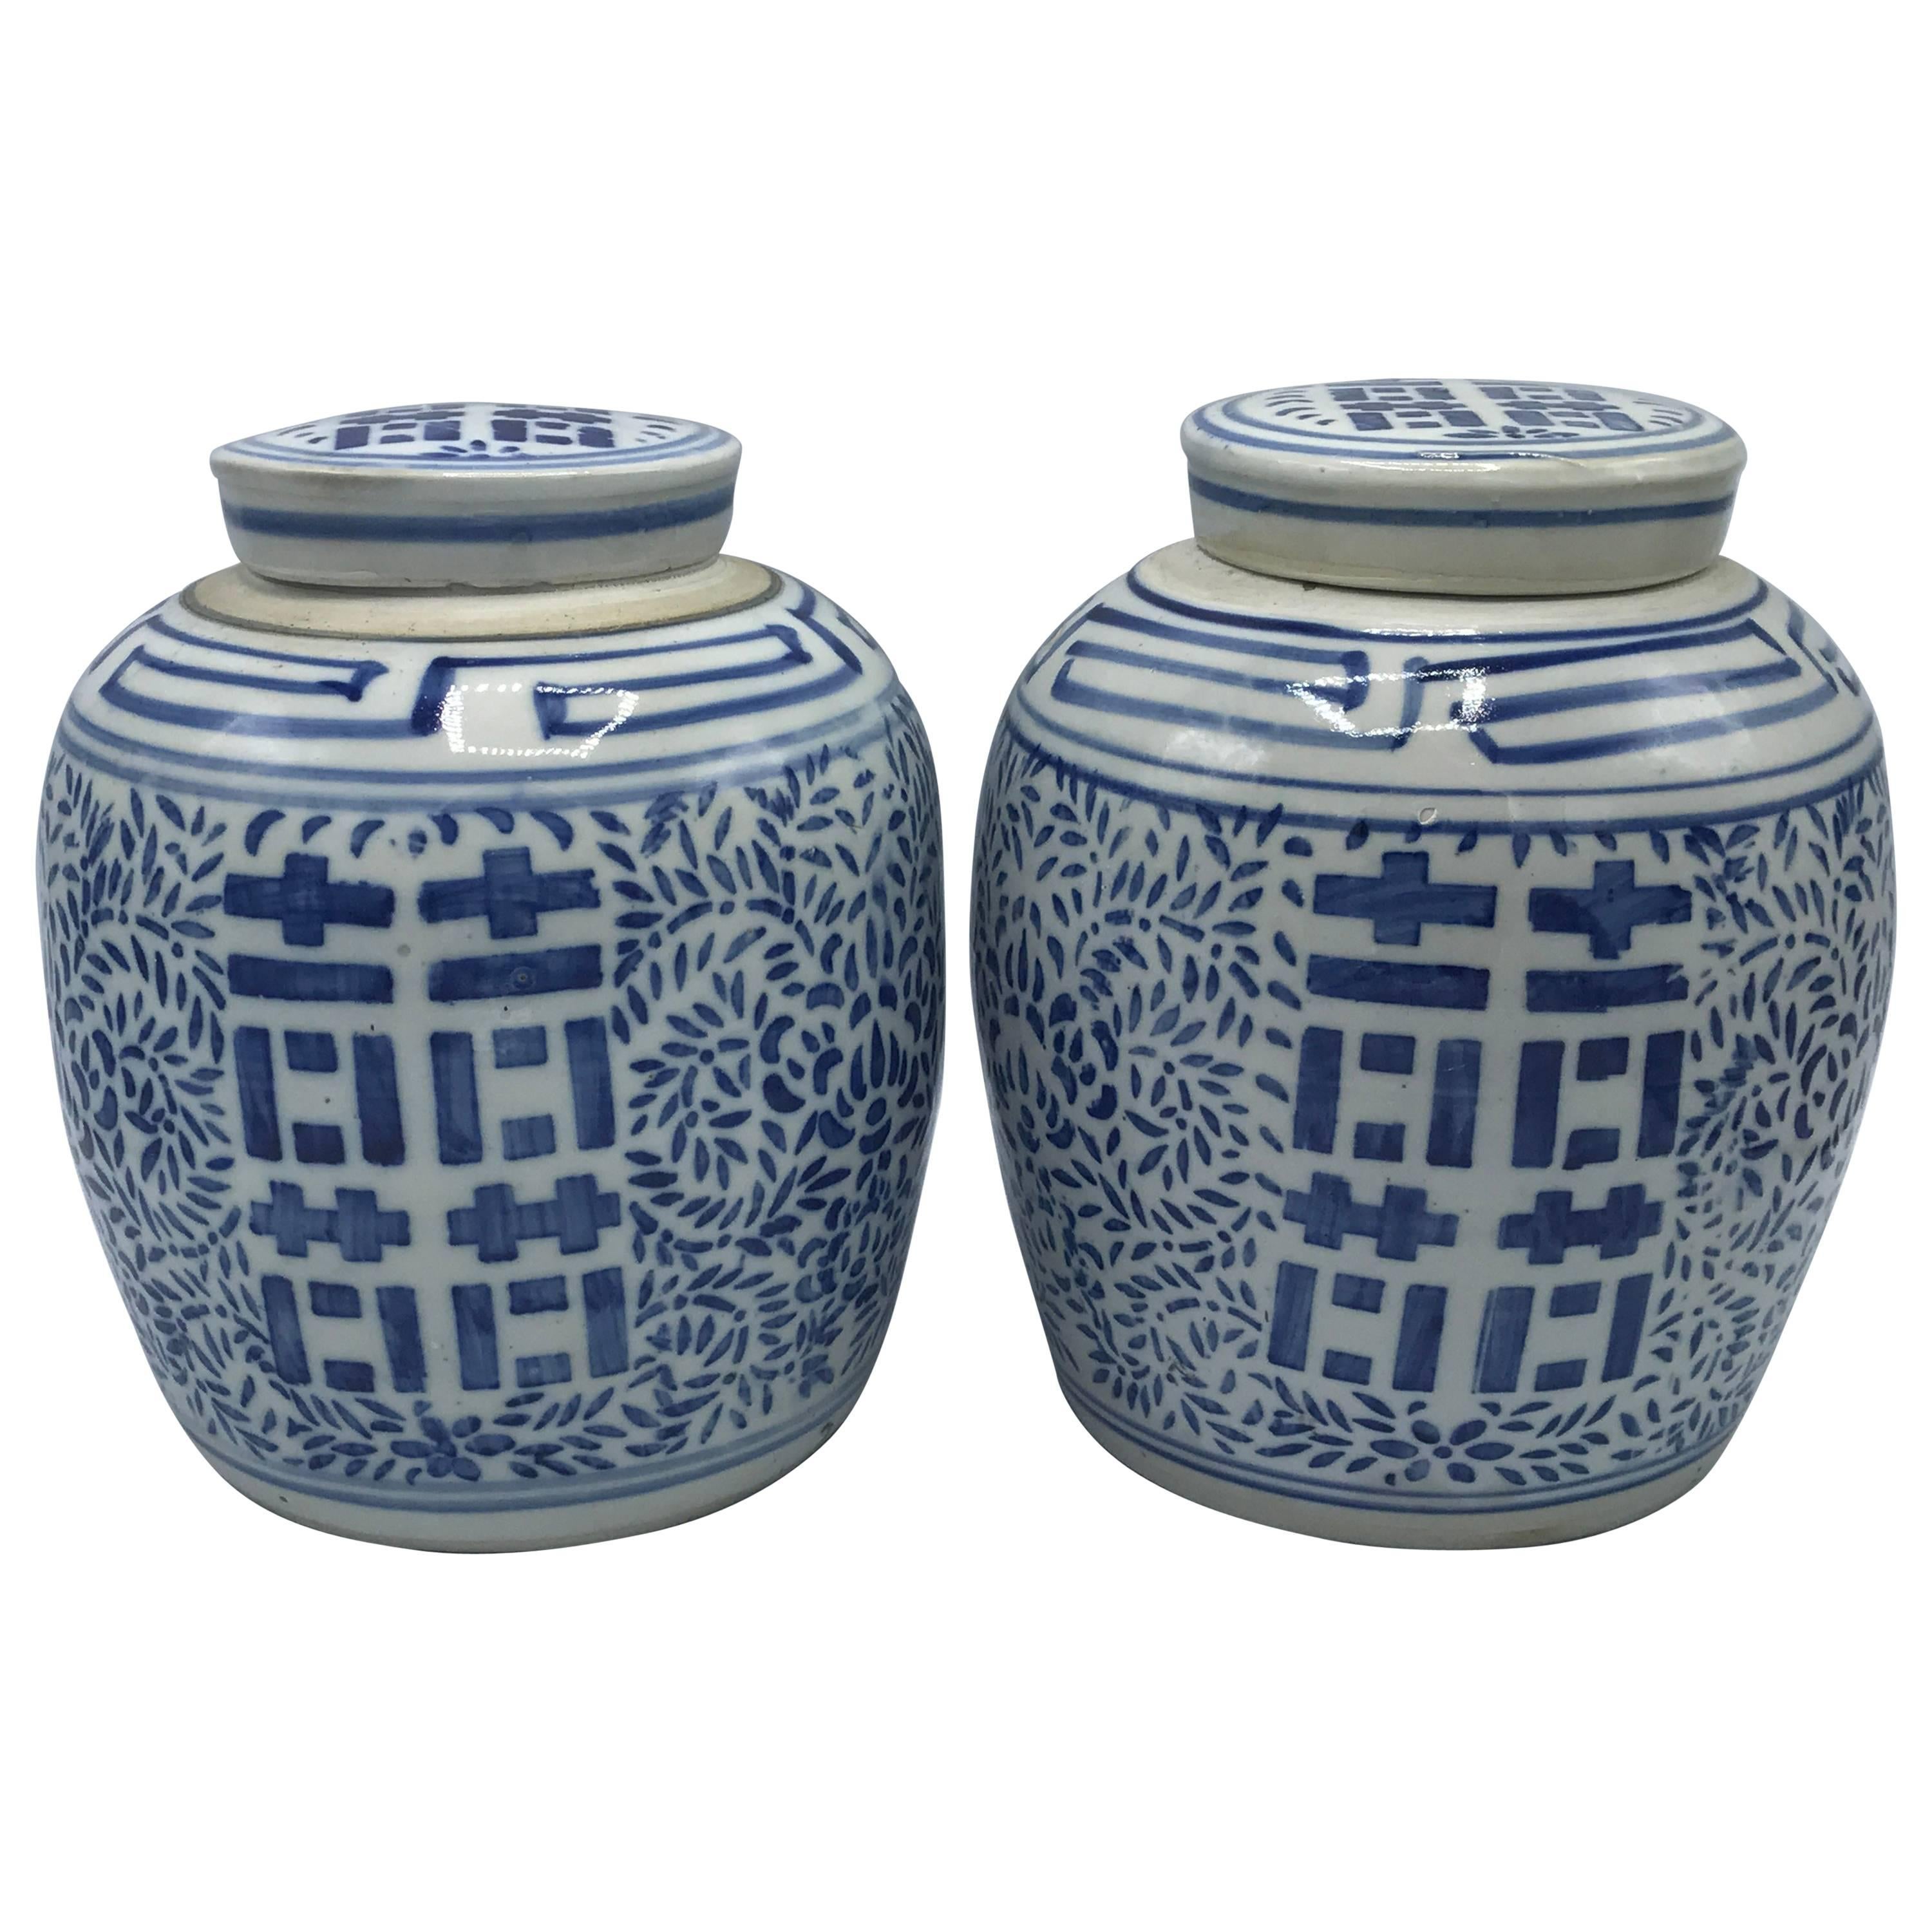 1960s Blue and White Double Happiness Ginger Jars, Pair